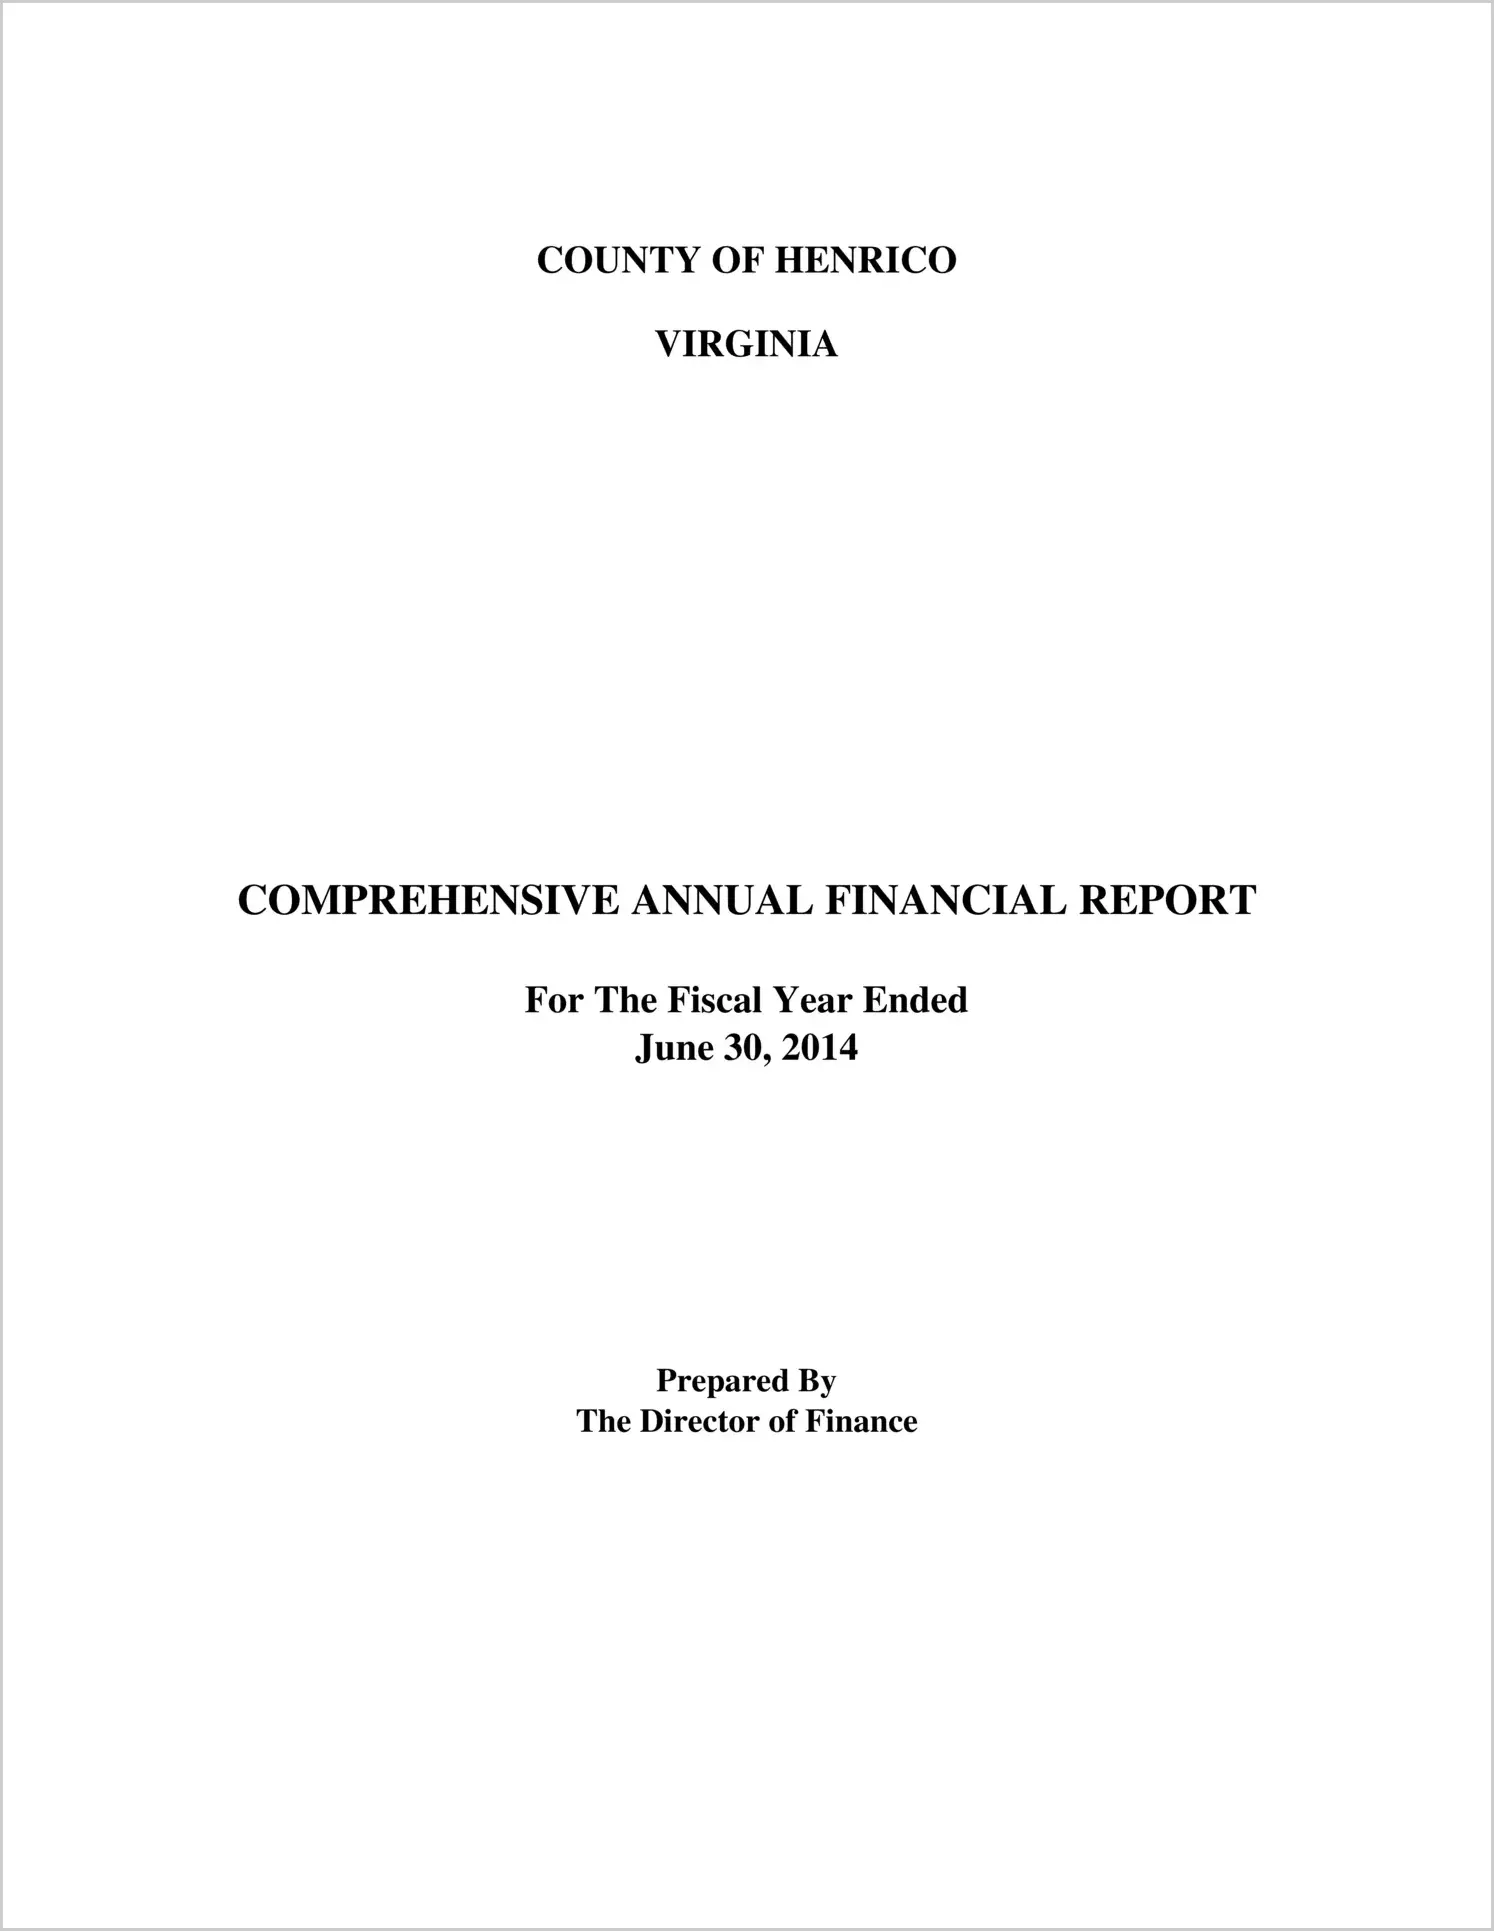 2014 Annual Financial Report for County of Henrico